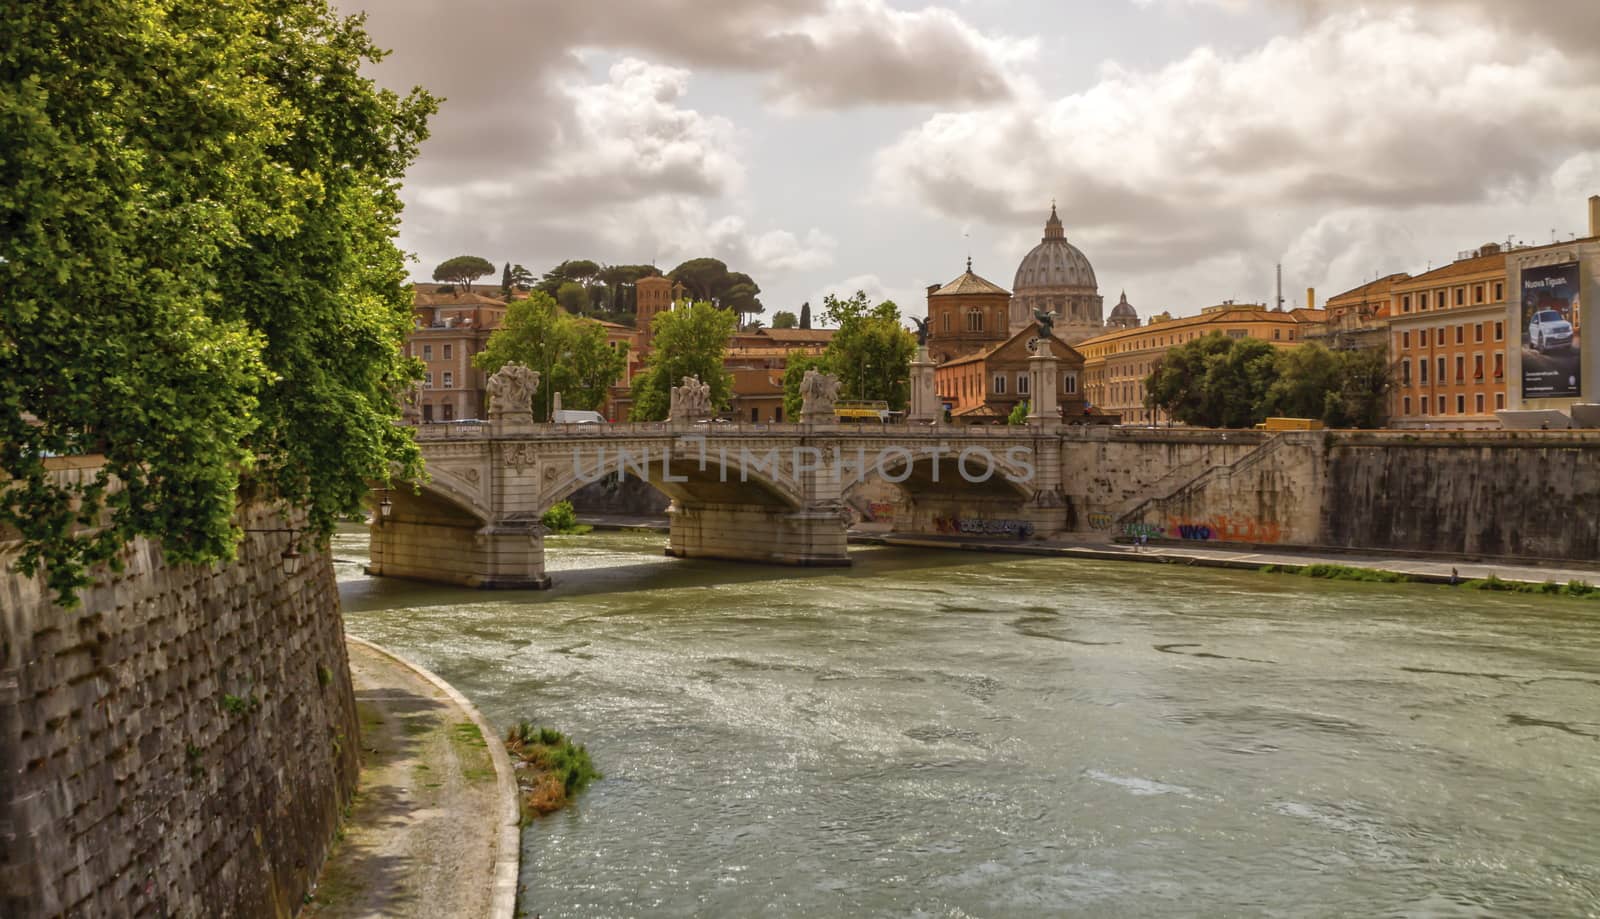 Tiber river, Ponte Sant'Angelo and St. Peter's cathedral, Roma, Italy by Elenaphotos21